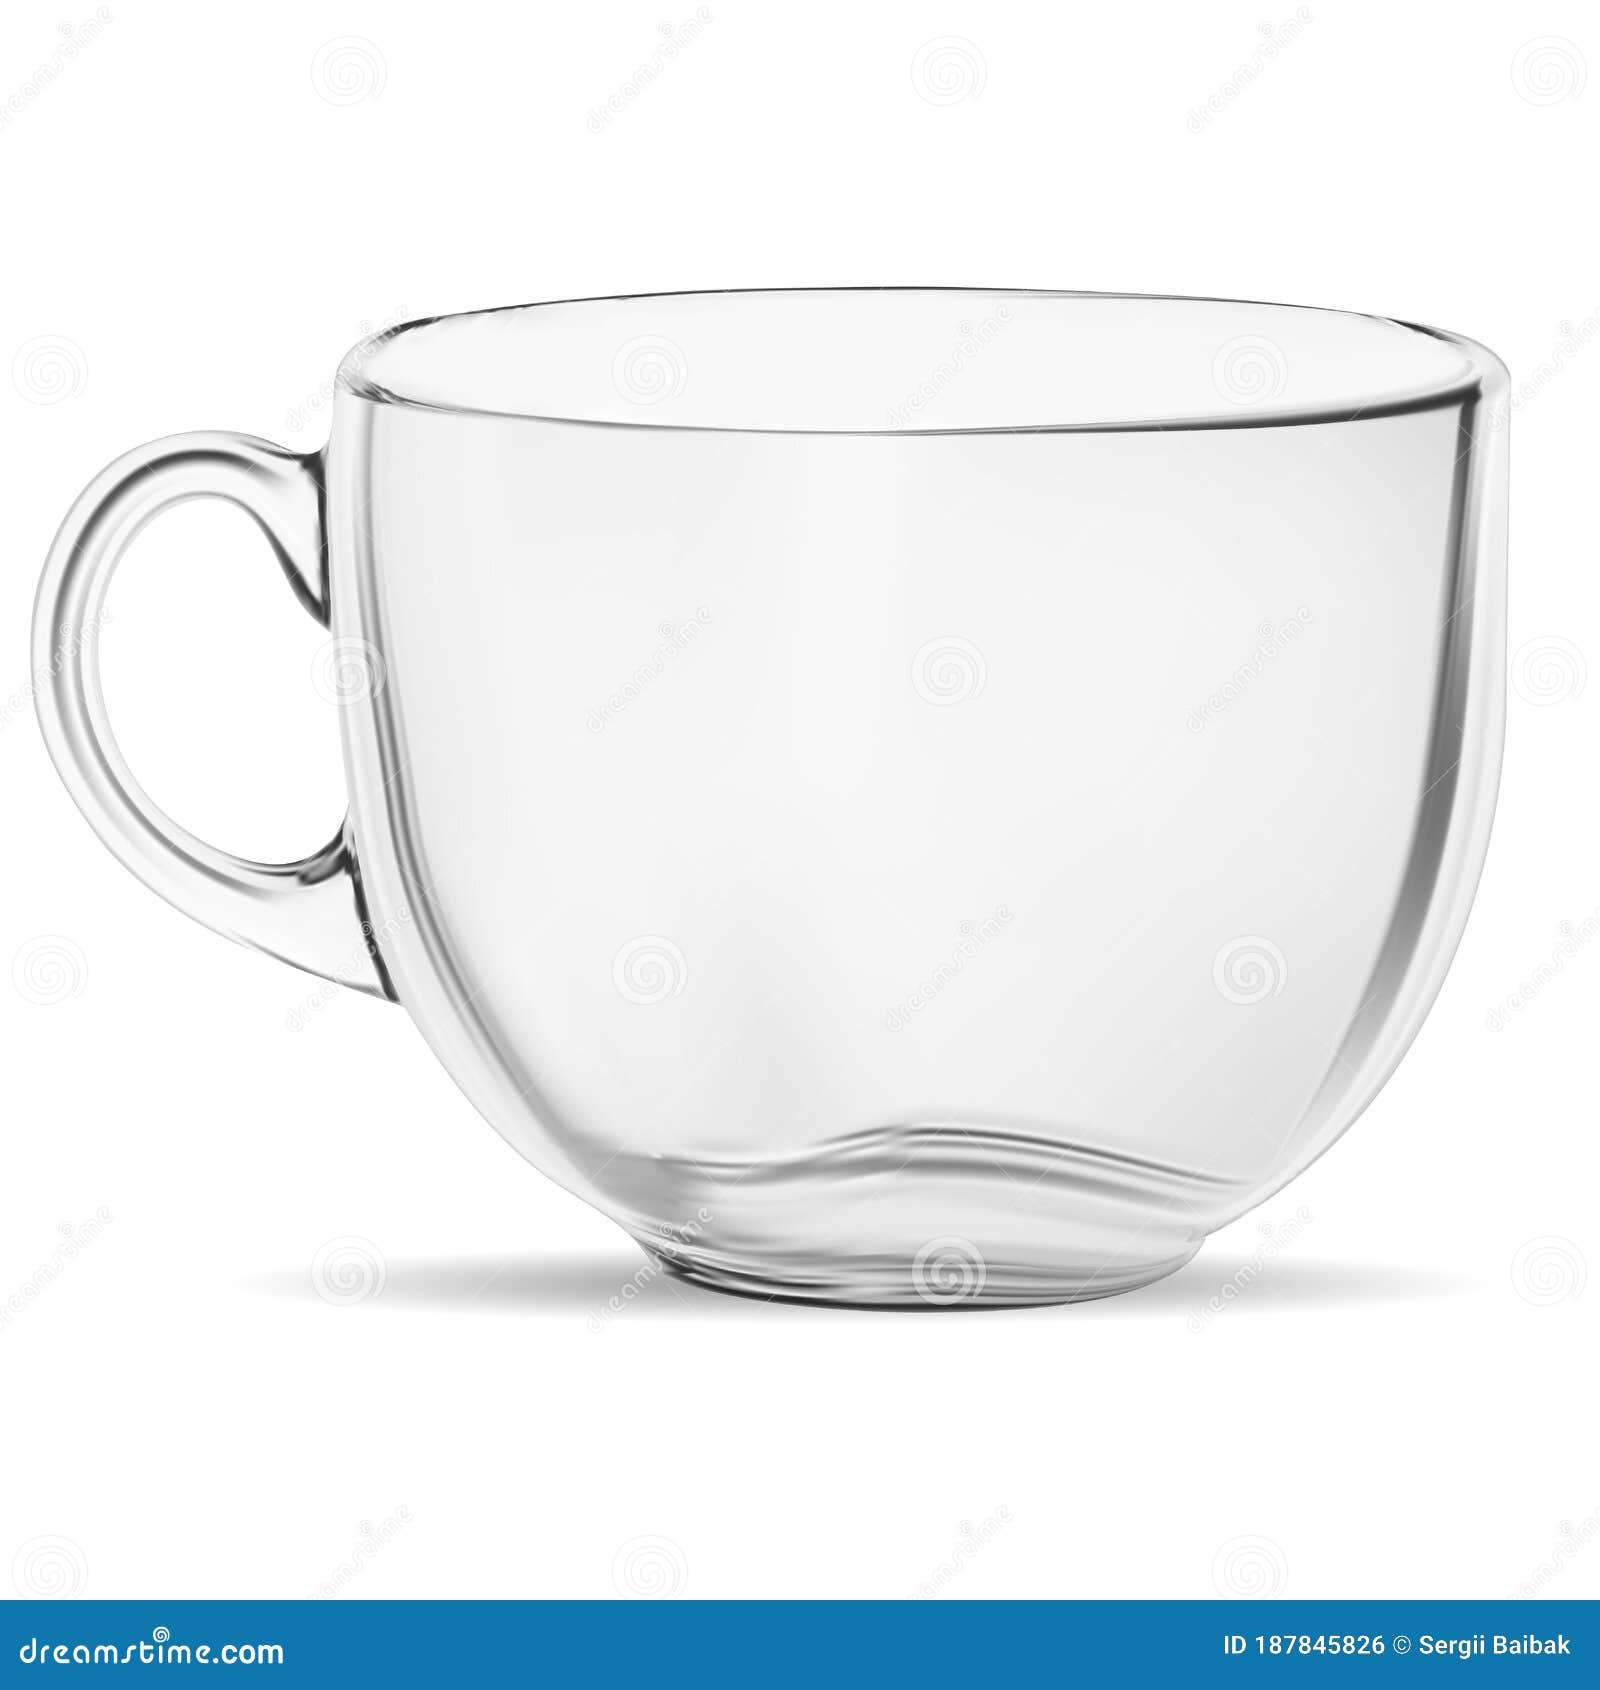 Download Clear Coffee Cup Mockup Transparent Tea Glass Mug Stock Vector Illustration Of Foam Perfect 187845826